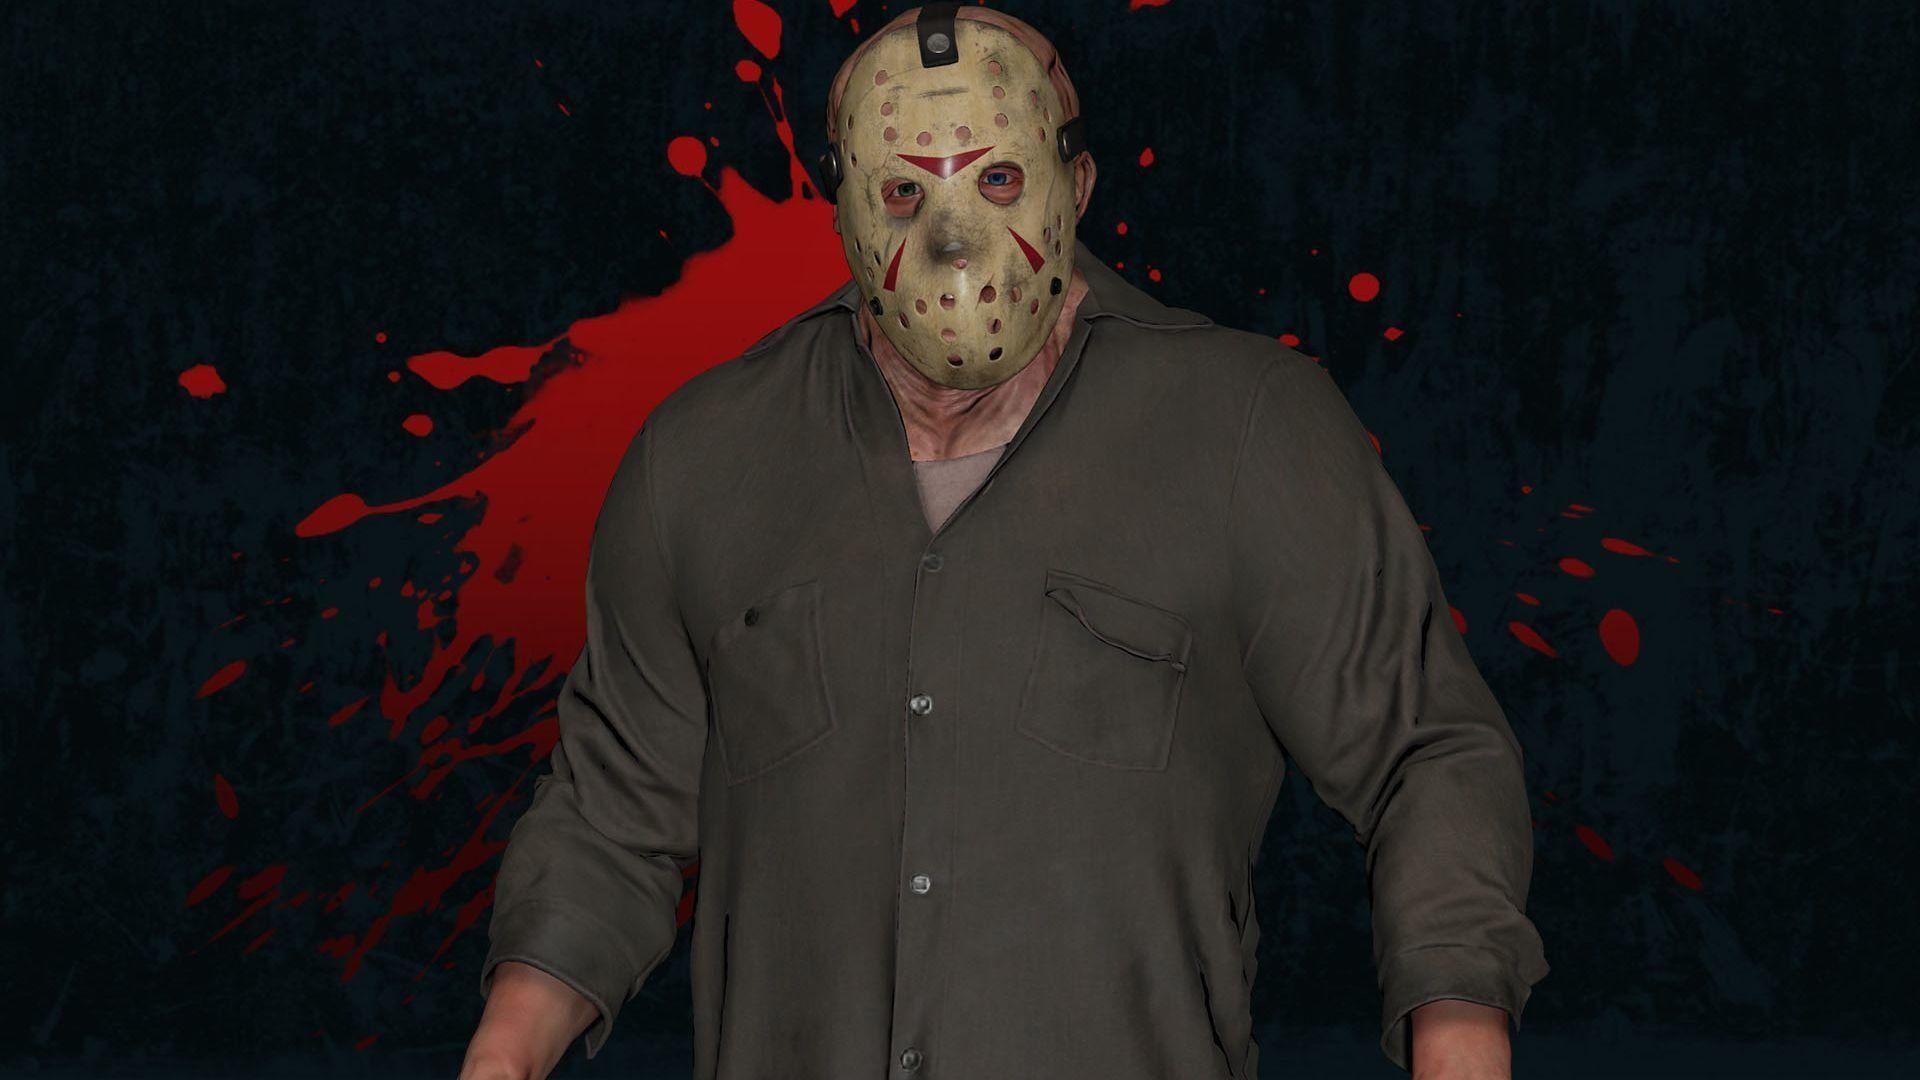 Friday the 13th The Game HD Wallpaper. Read games reviews, play